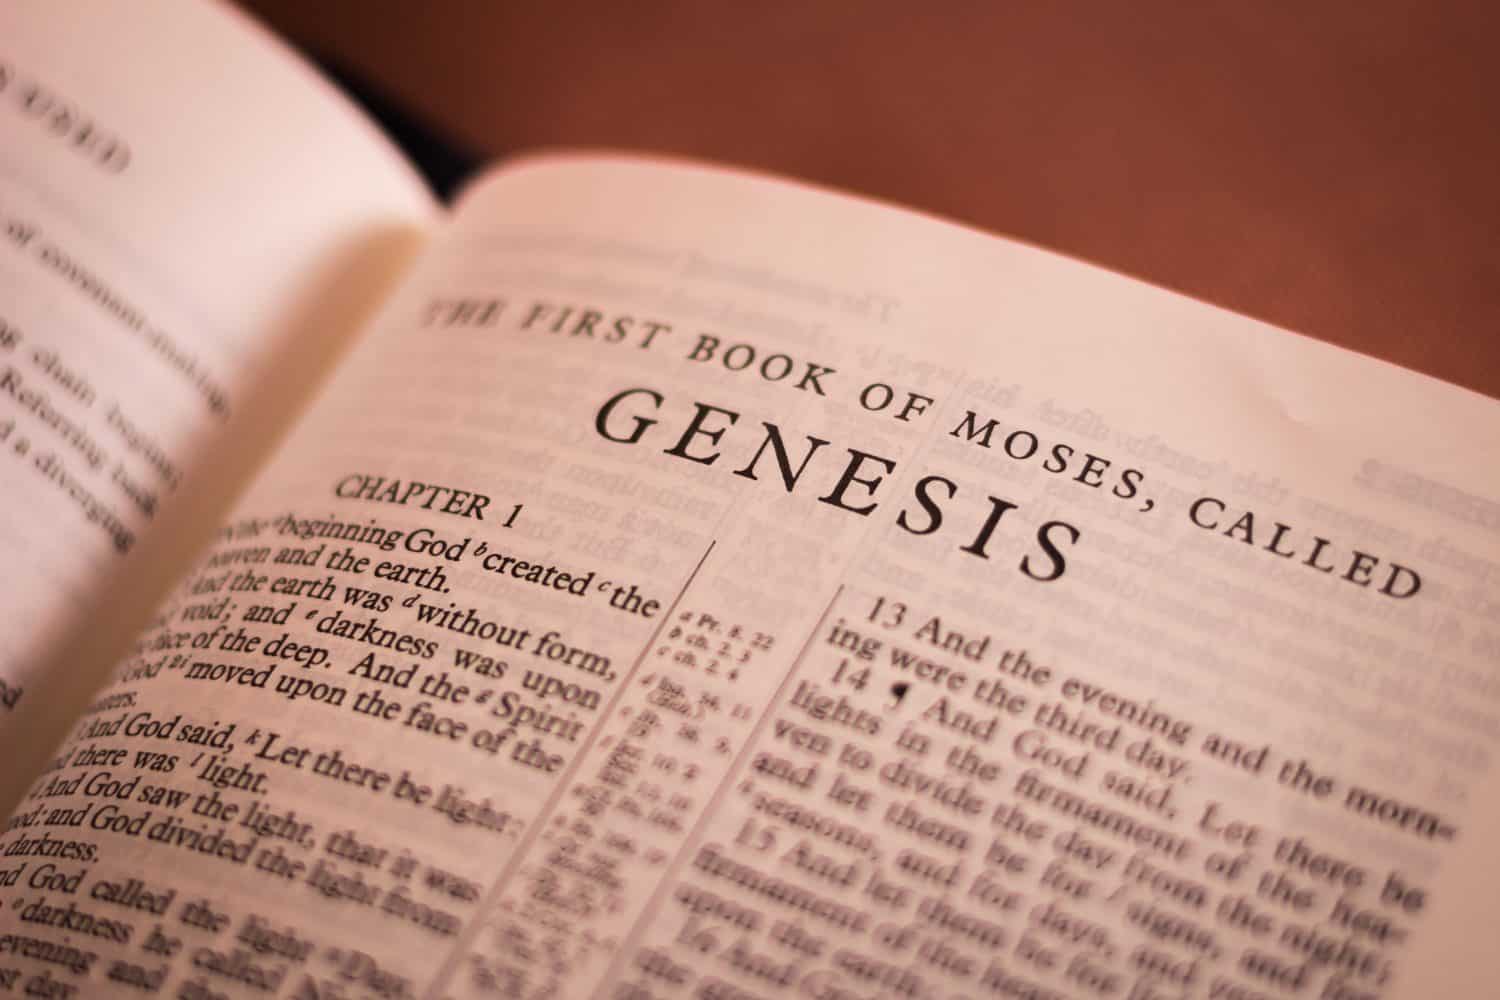 Book of Genesis of the Holy Bible, Old Testament